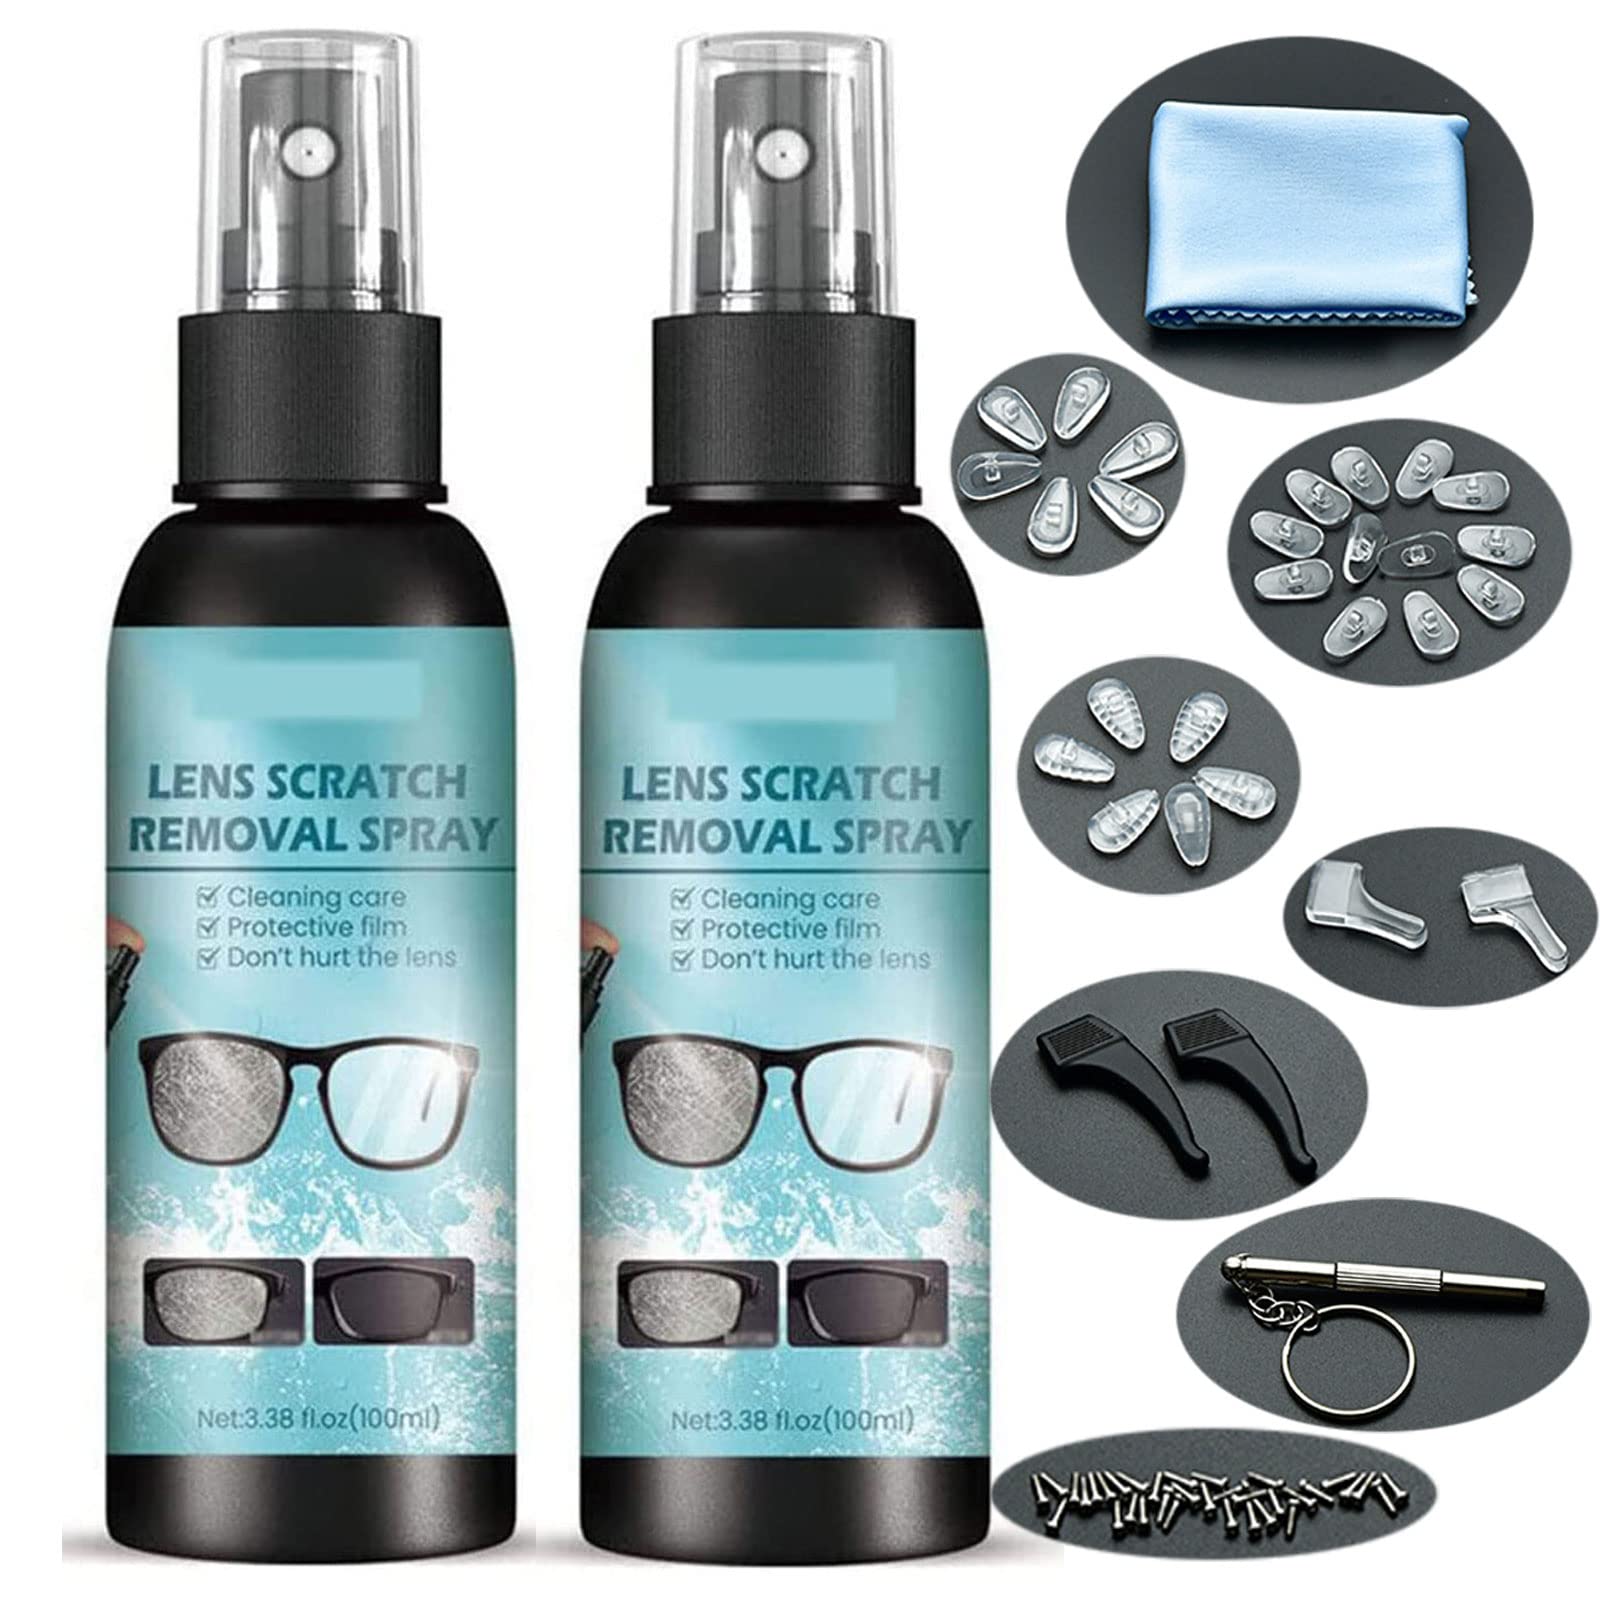 CHNLML New Lens Scratch Removal Spray,Eyeglass Windshield Glass Repair  Liquid,Carefully Engineered Glasses Cleaner,for All Lenses (2PCS)